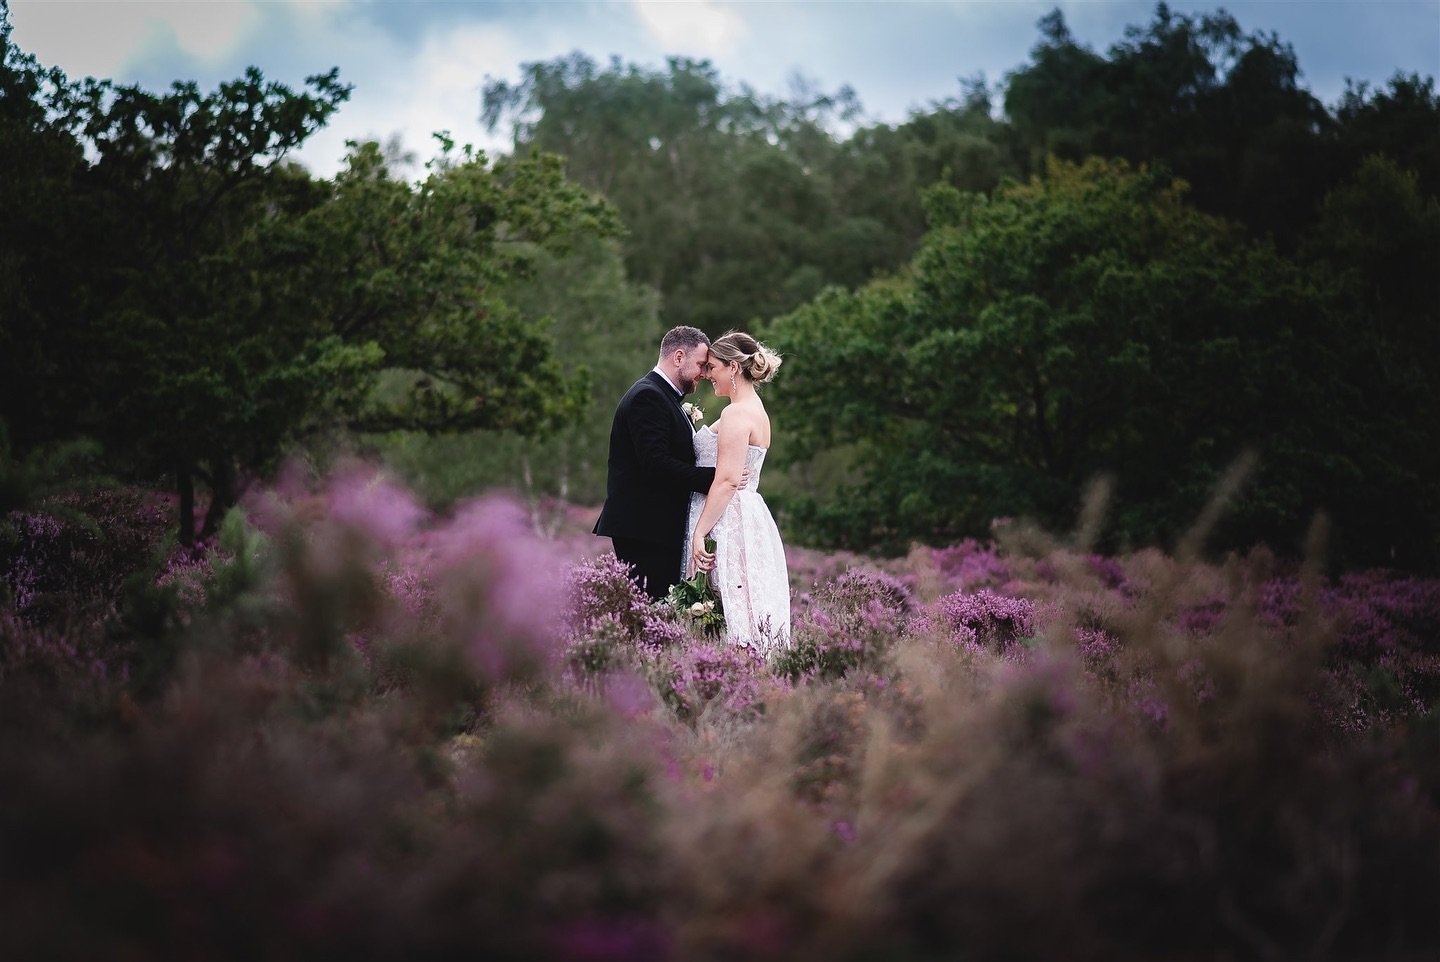 For my full portfolio click the link in bio&hellip;. Love blooms in the most enchanting places. Here Sammi and Ronan, hand in hand, stand amidst the vibrant purple heather, a perfect backdrop after their magical wedding ceremony. May their journey be